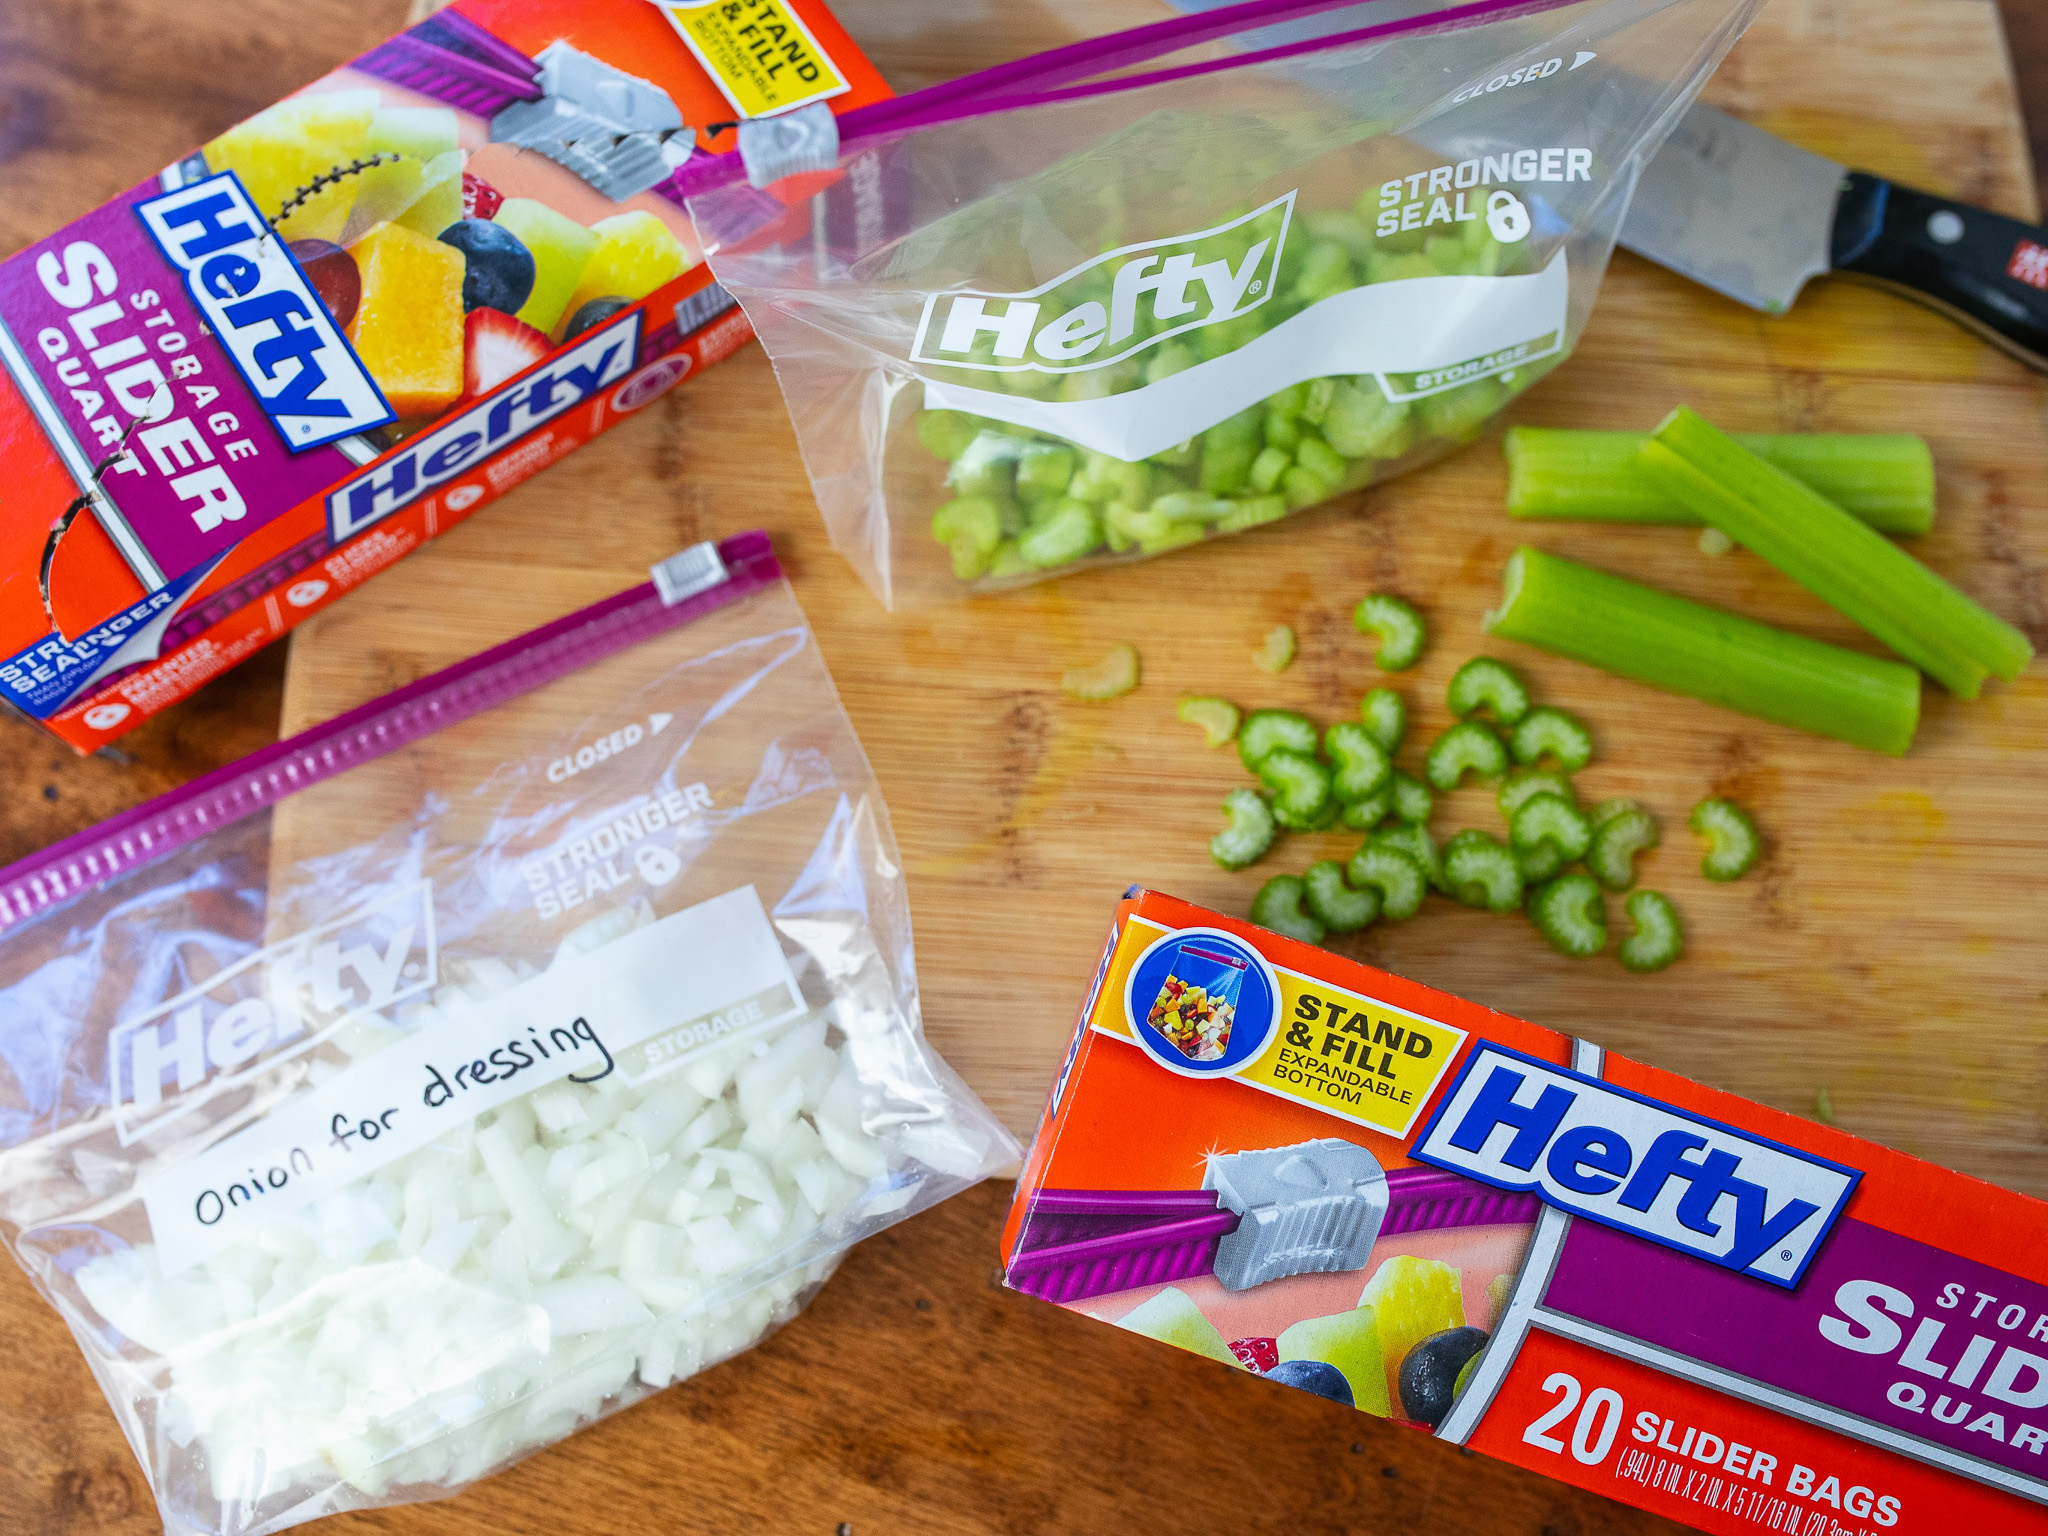 Load Your Coupon And Save On Hefty® Slider Bags At Publix – $2 Coupon! -  iHeartPublix